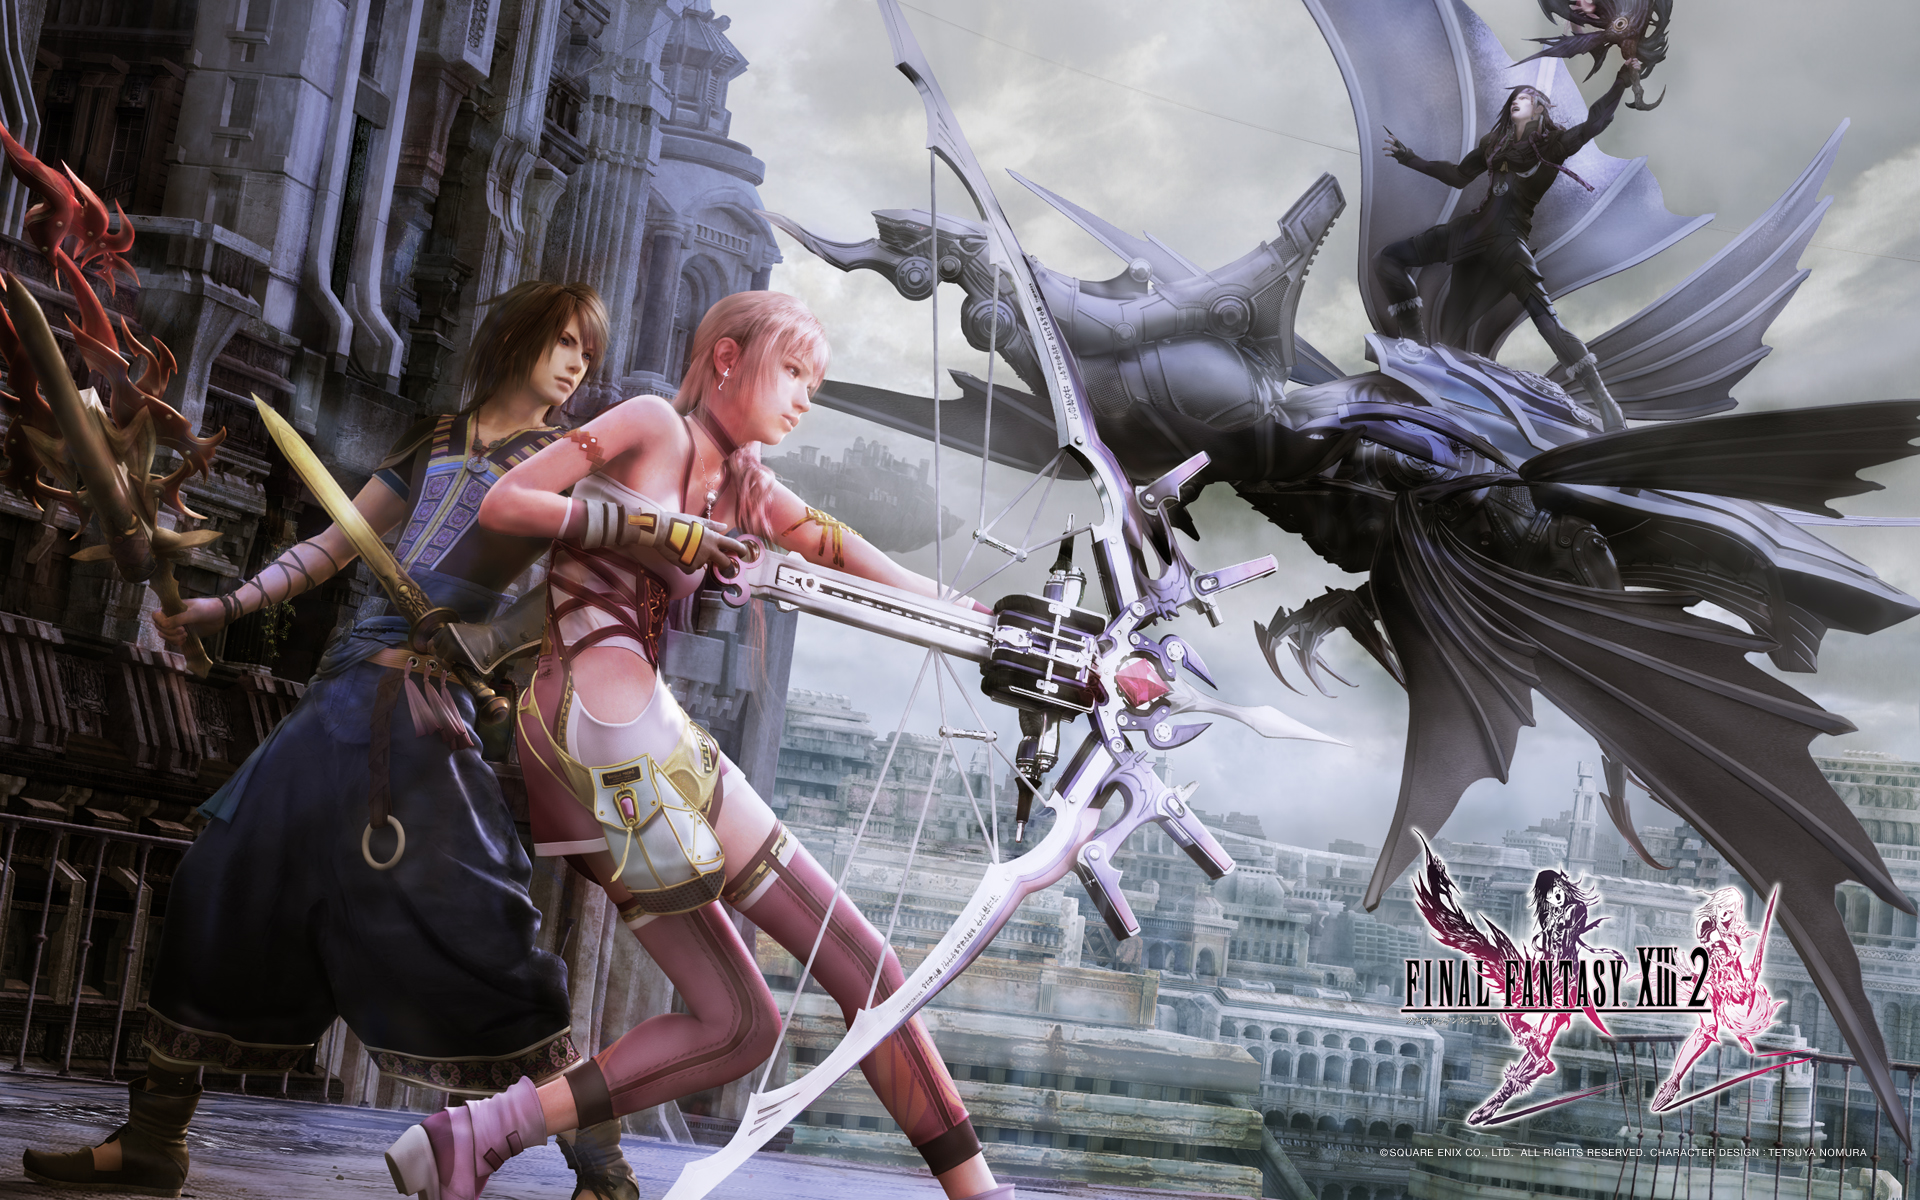 Free Download Final Fantasy Xiii 2 Ffxiii 2 Ff13 2 Wallpapers 19x10 For Your Desktop Mobile Tablet Explore 46 Final Fantasy Serah Wallpaper Final Fantasy Serah Wallpaper Final Fantasy Backgrounds Final Fantasy Wallpapers